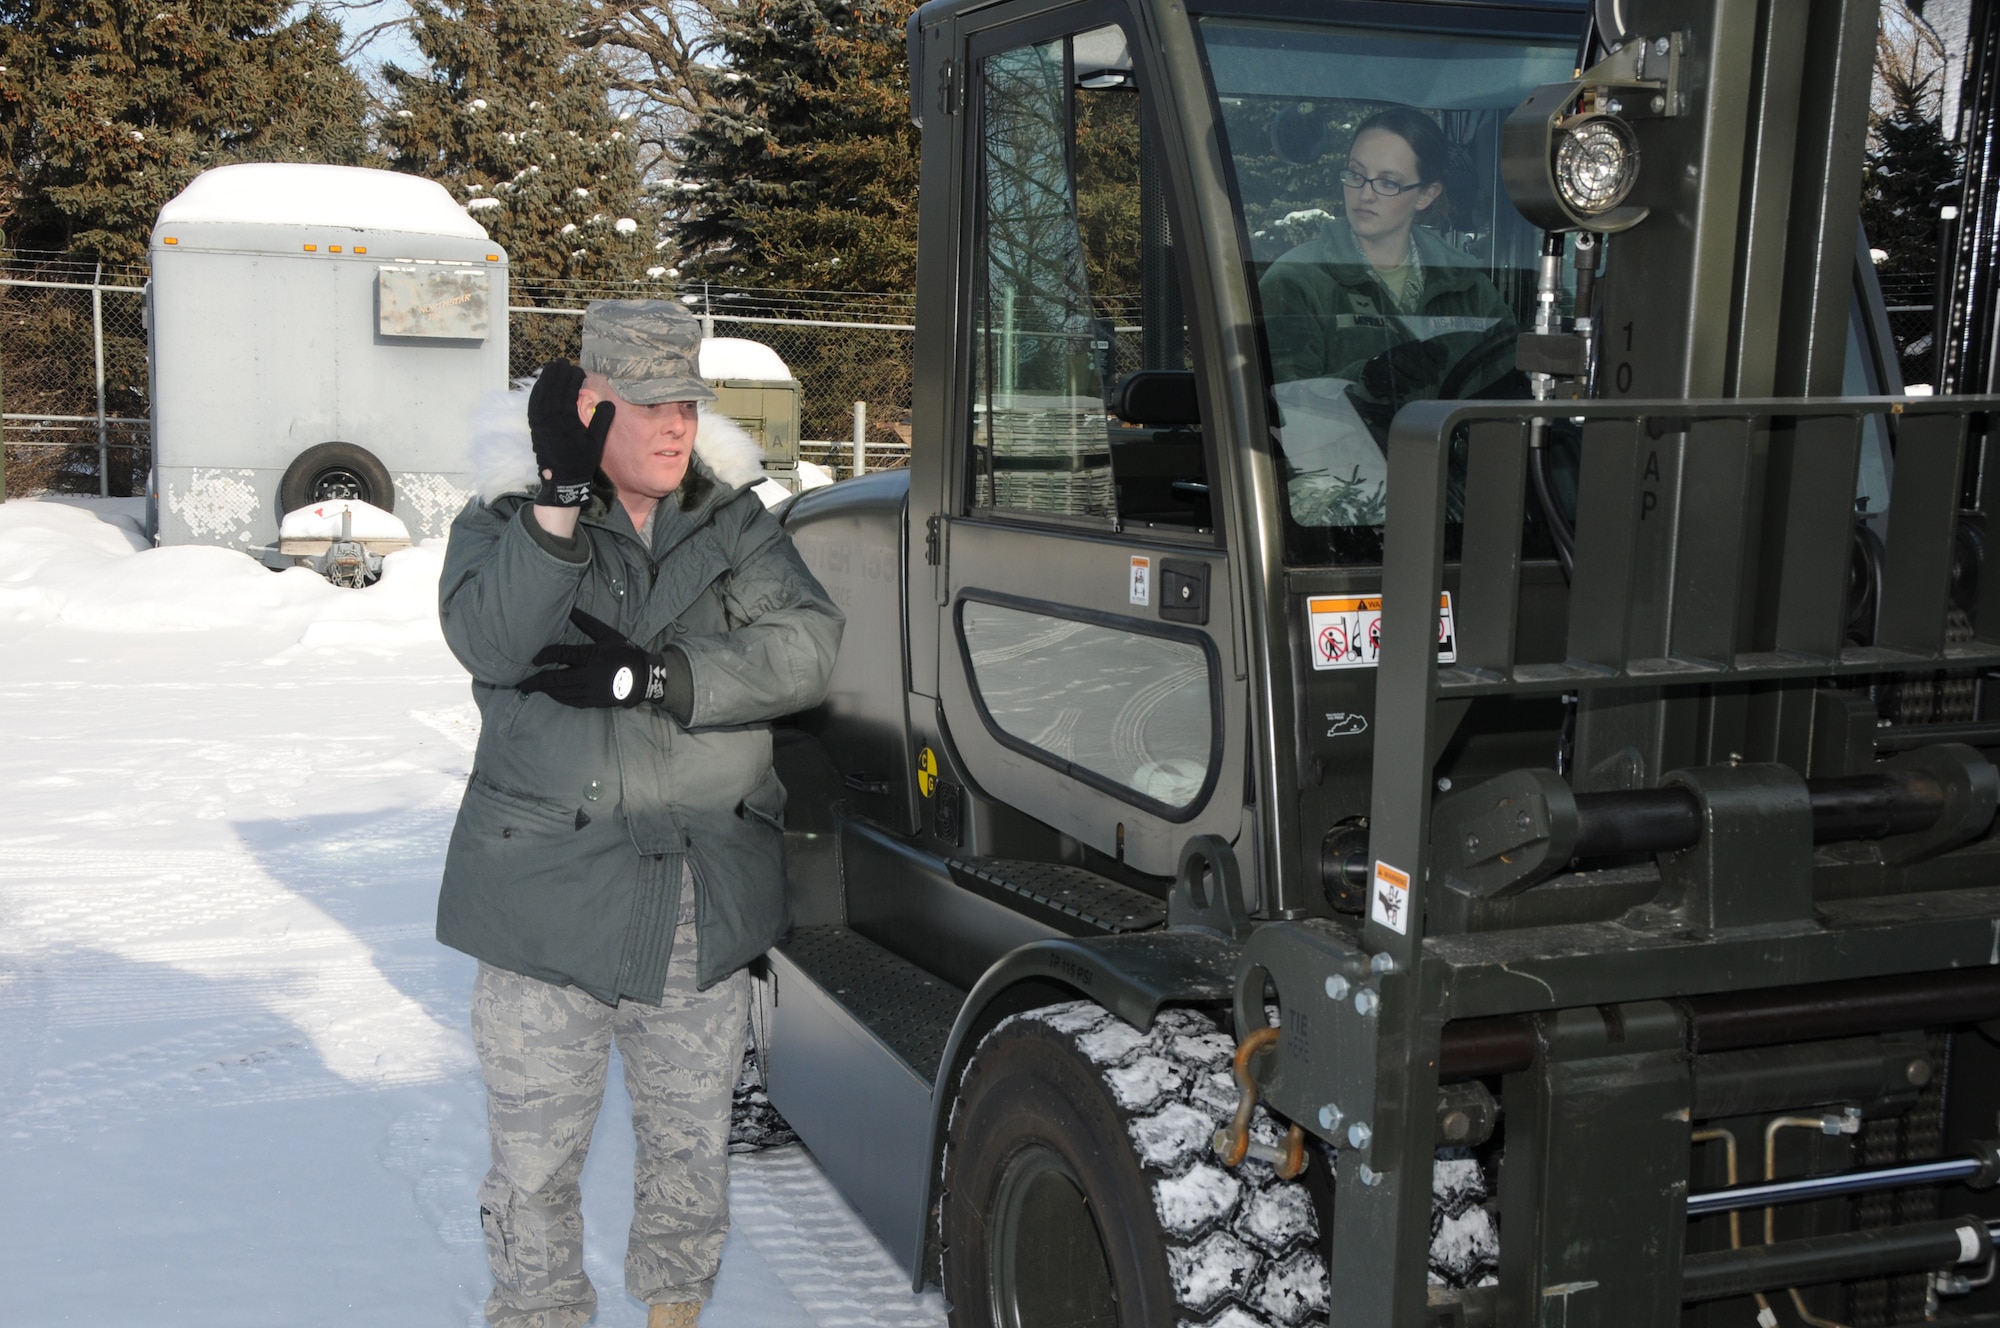 Master Sgt. John Kubes, superintendent of the small air terminal at the 133rd Logistics Readiness Squadron, directs a forklift driven by Senior Airman Kathryn Morrill of the small air terminal on Jan. 22, 2010 on the Air National Guard Base in St. Paul, Minn. Kubes has been selected to represent Minnesota as the Air Guard Outstanding Senior NCO and Morrill has been selected to represent Minnesota as the Air Guard Outstanding Airman for 2011. USAF official photo by Tech. Sgt. John Wiggins